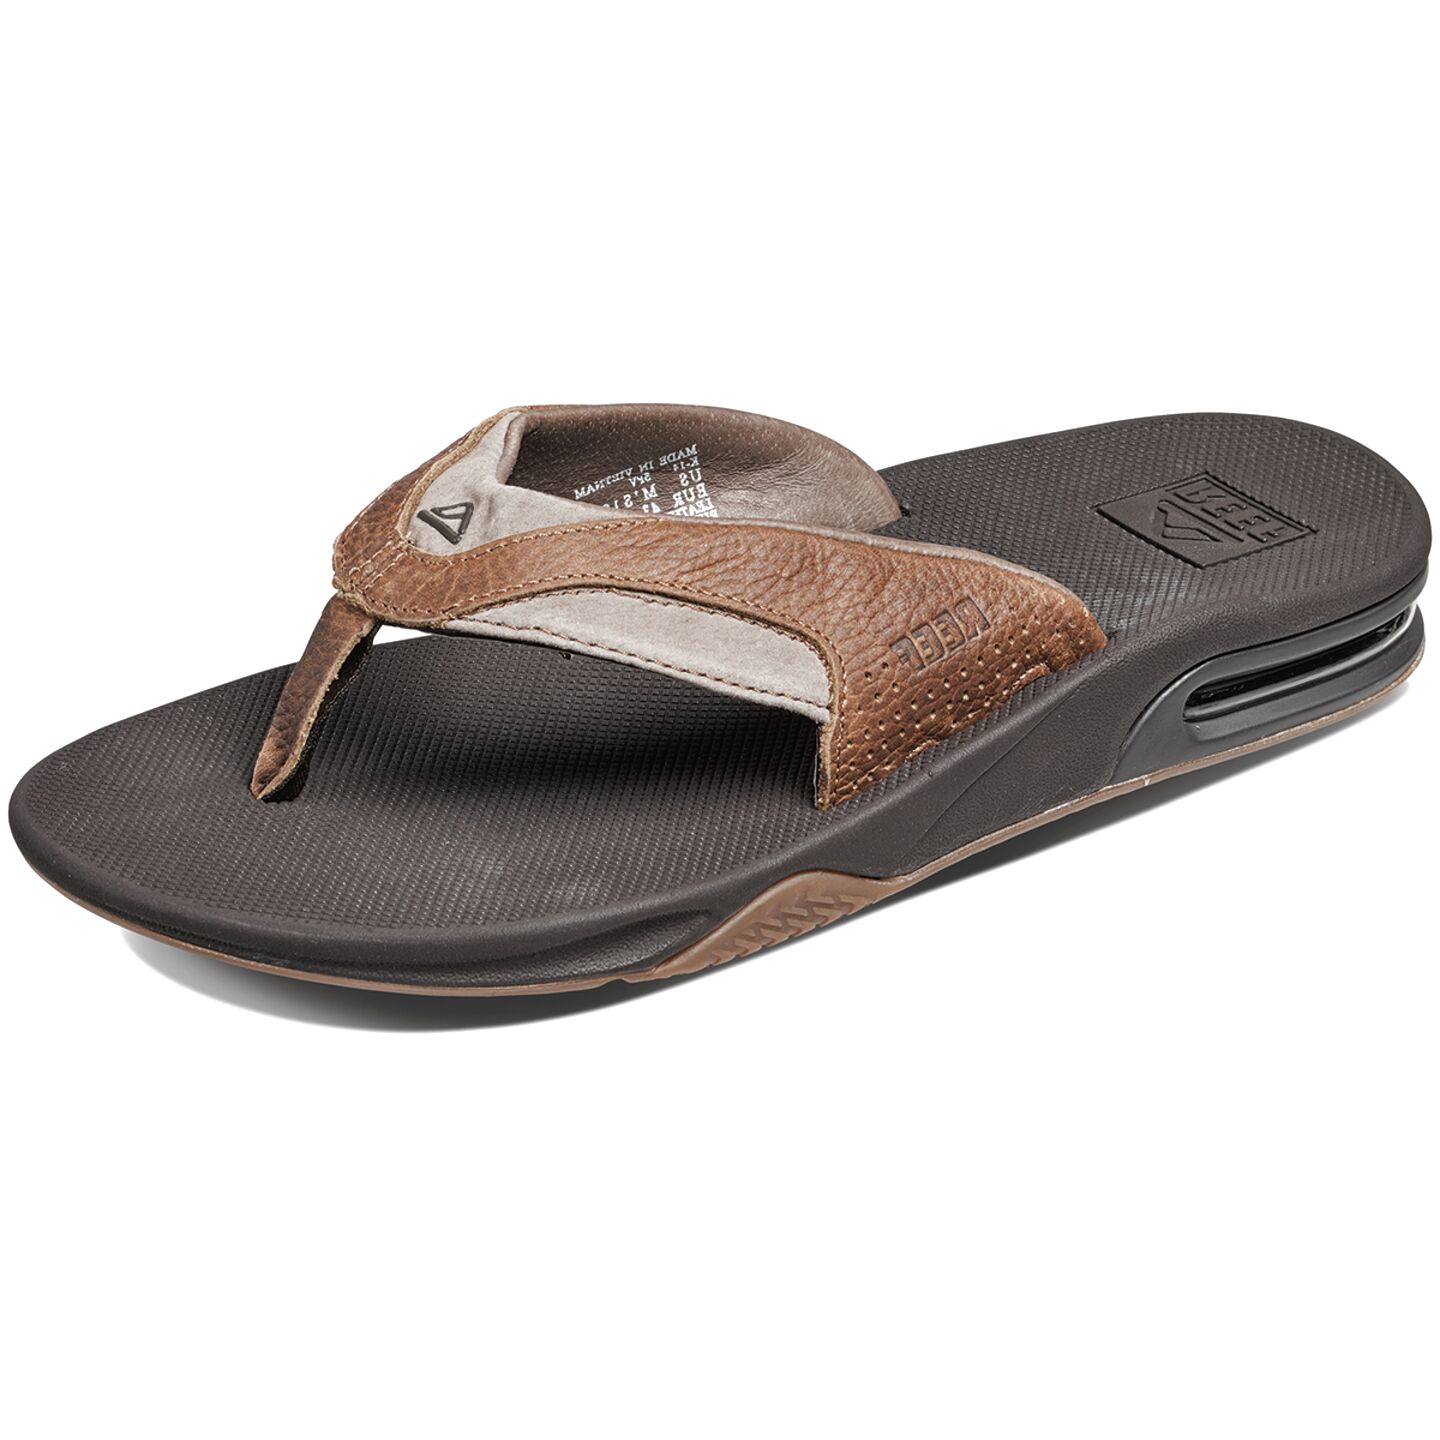 Mens Leather Flip Flops for sale in UK | 65 used Mens Leather Flip Flops